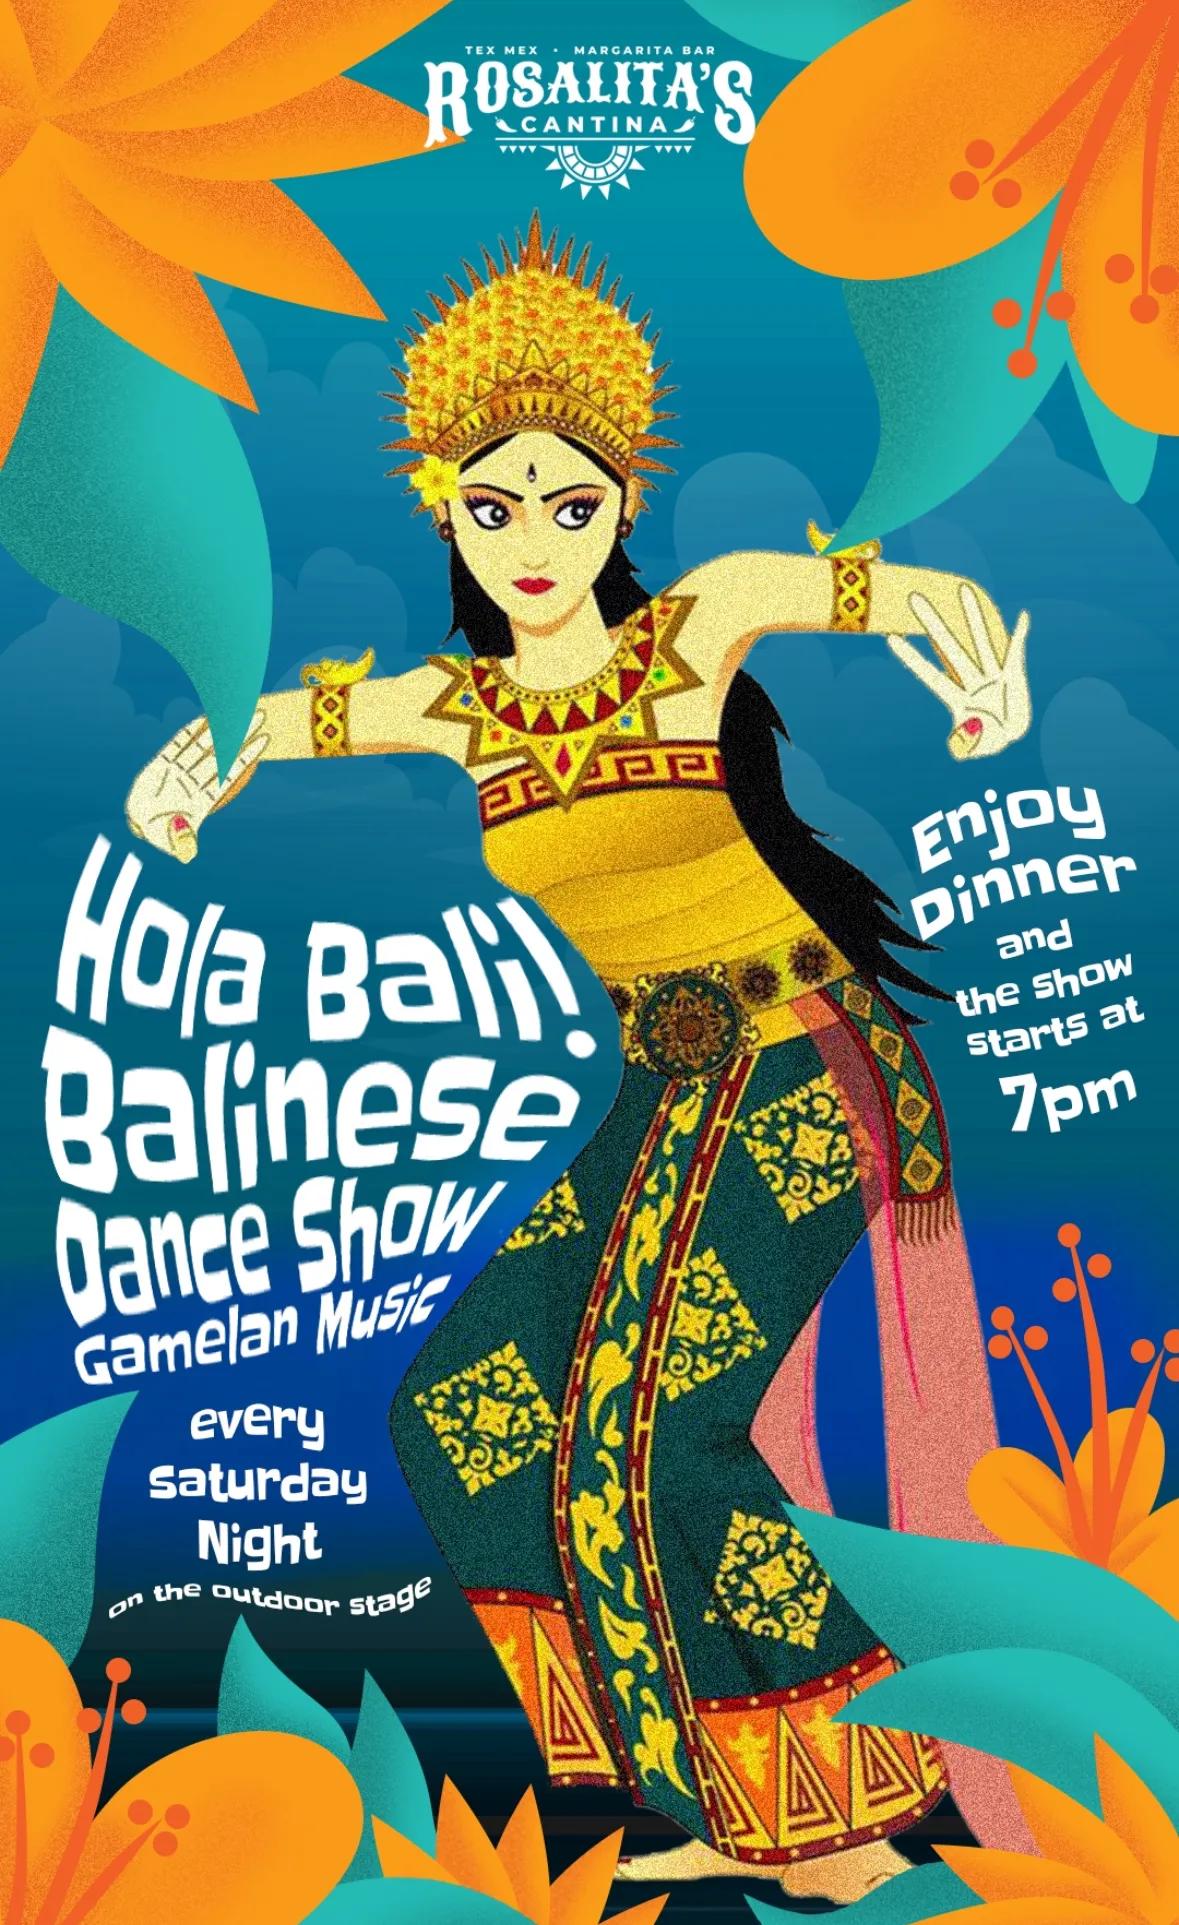 Event at Rosalita's Cantina every Saturday 2024: Balinese Dance Show